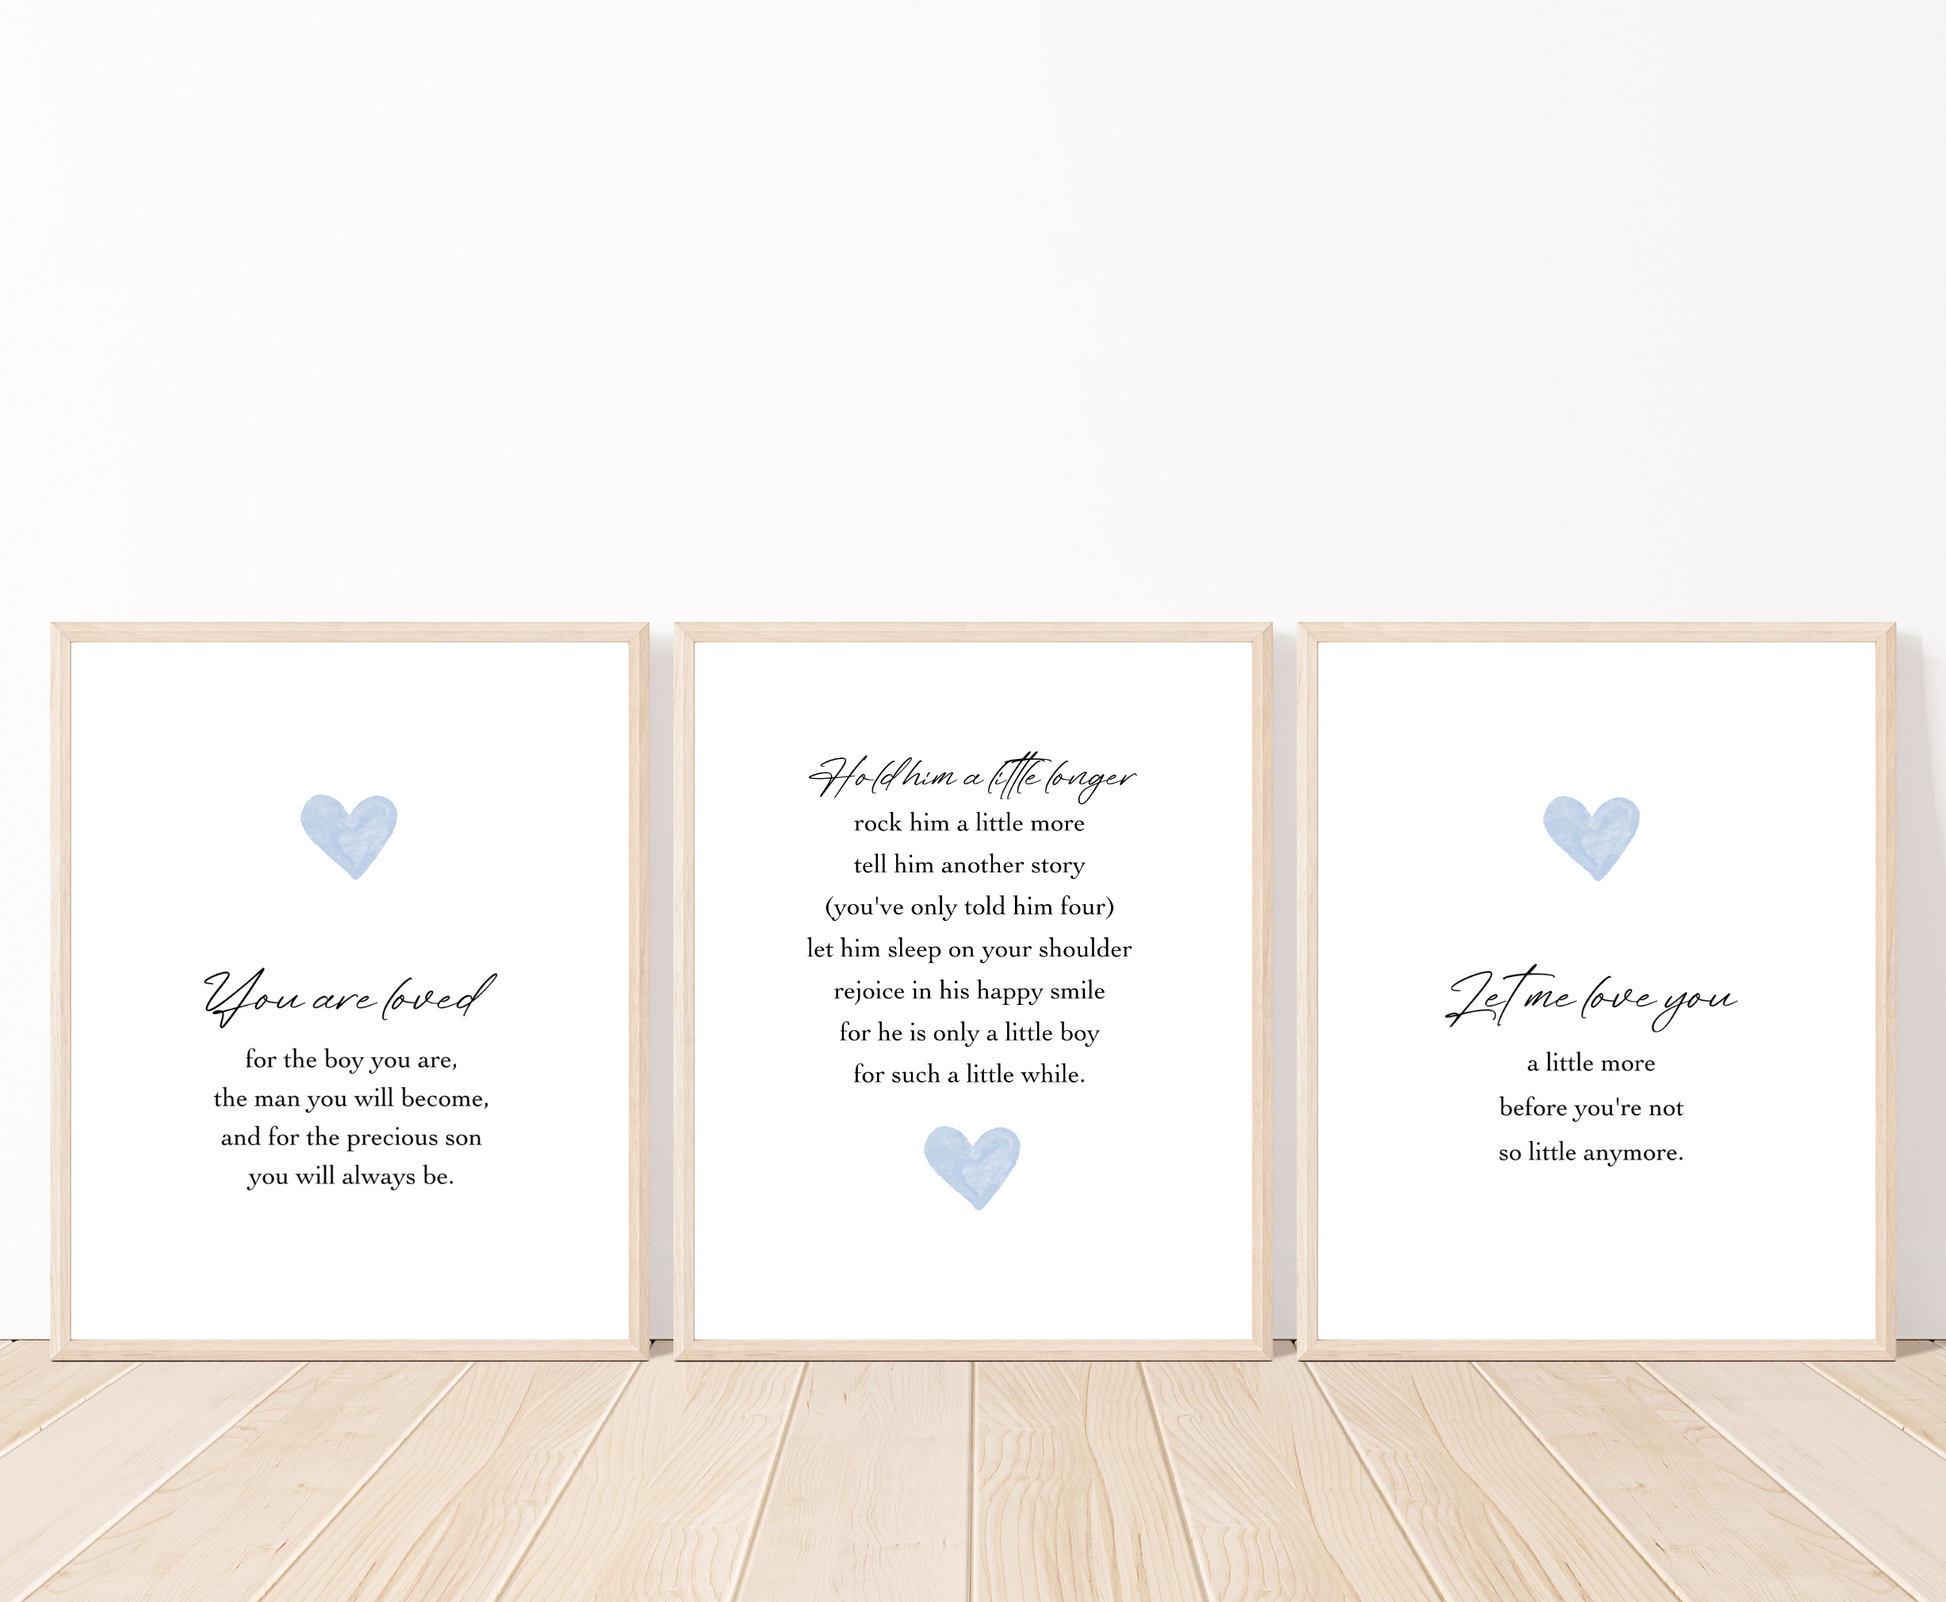 Three frames for a baby boy’s room graphics. The first one shows a baby blue heart with a piece of writing below that says: You are loved for the boy you are, the man you will become, and for the precious son you will always be. The middle one has a baby blue heart below the piece of writing. The last one shows a baby blue heart with a piece of writing below that says: Let me love you, a little more before you’re not so little anymore.